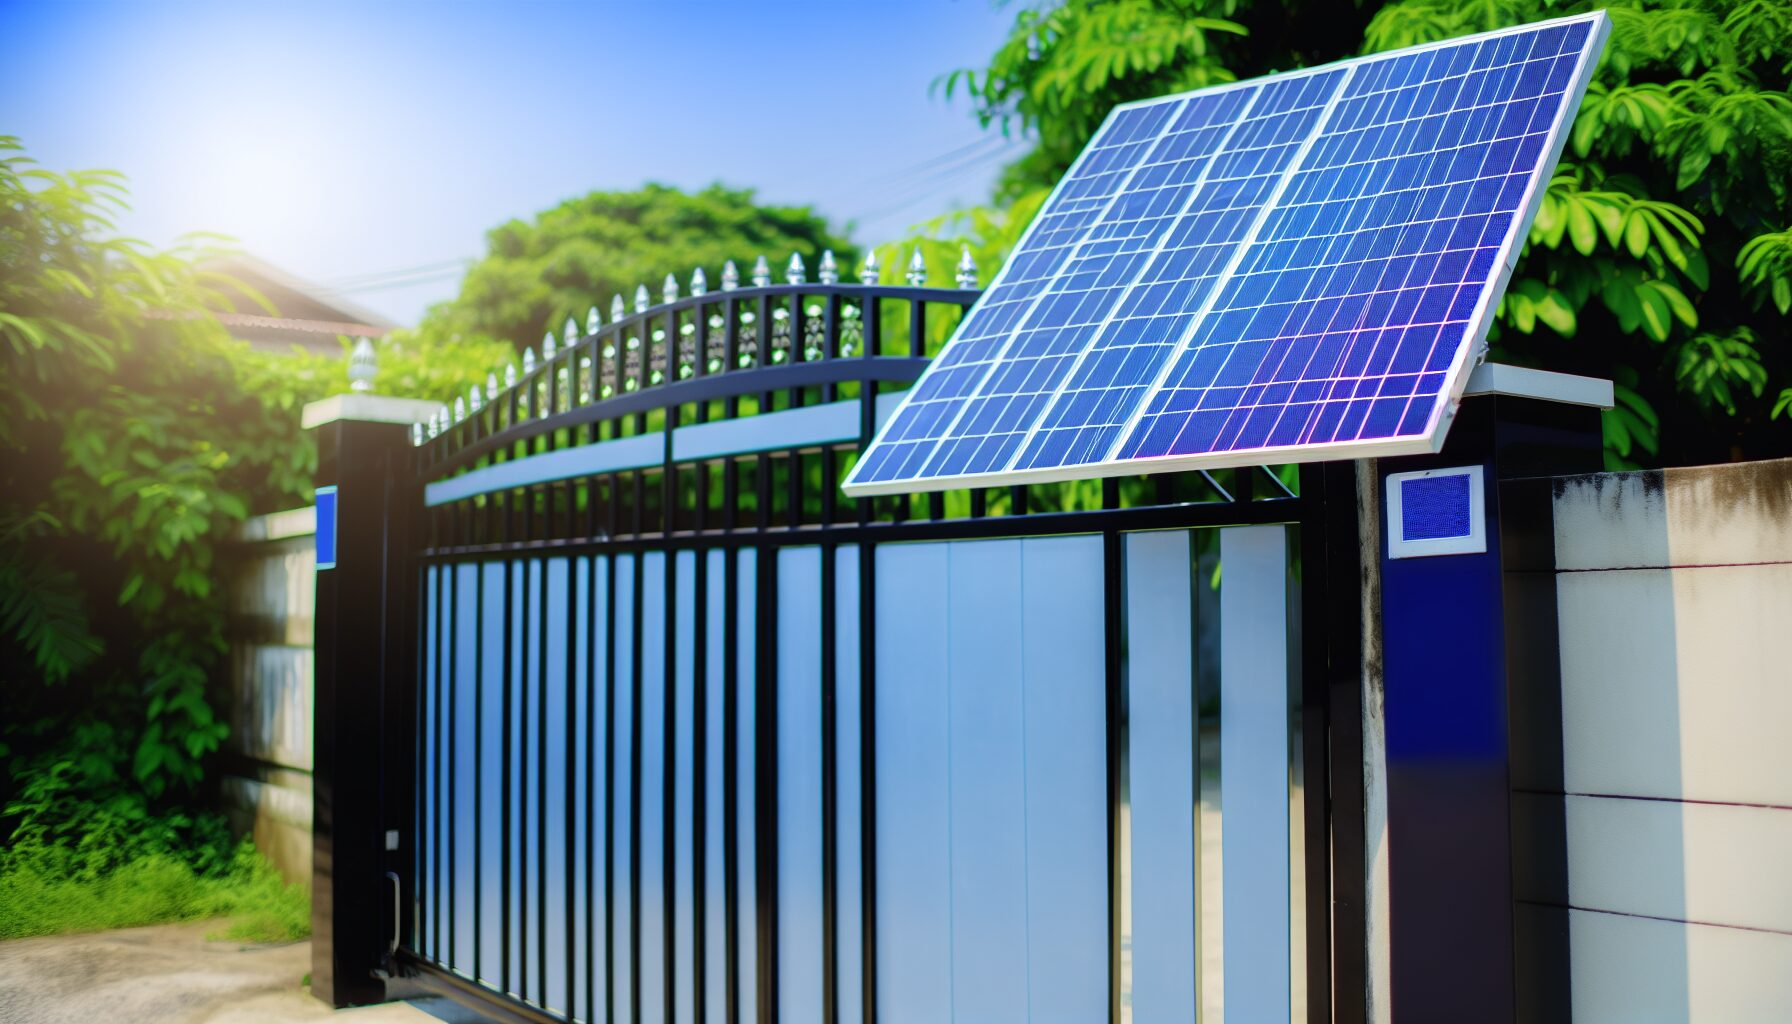 driveway gate with solar panels